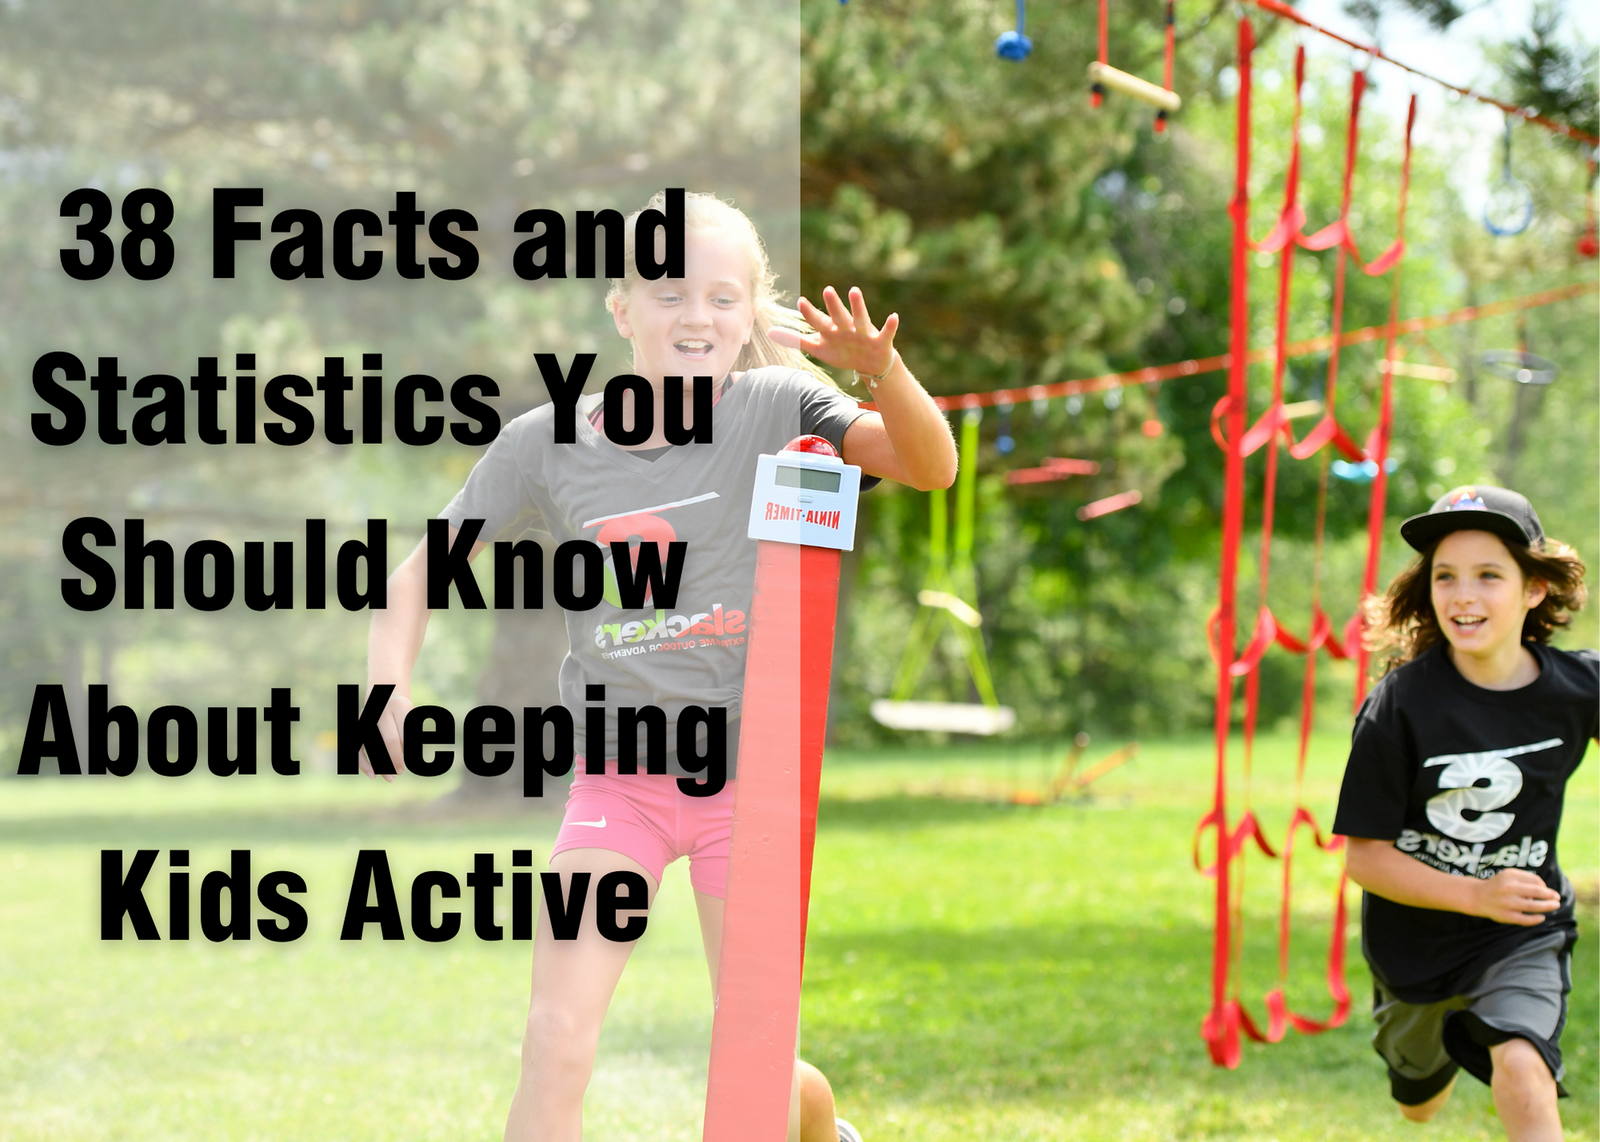 38 Facts and Statistics You Should Know About Keeping Kids Active